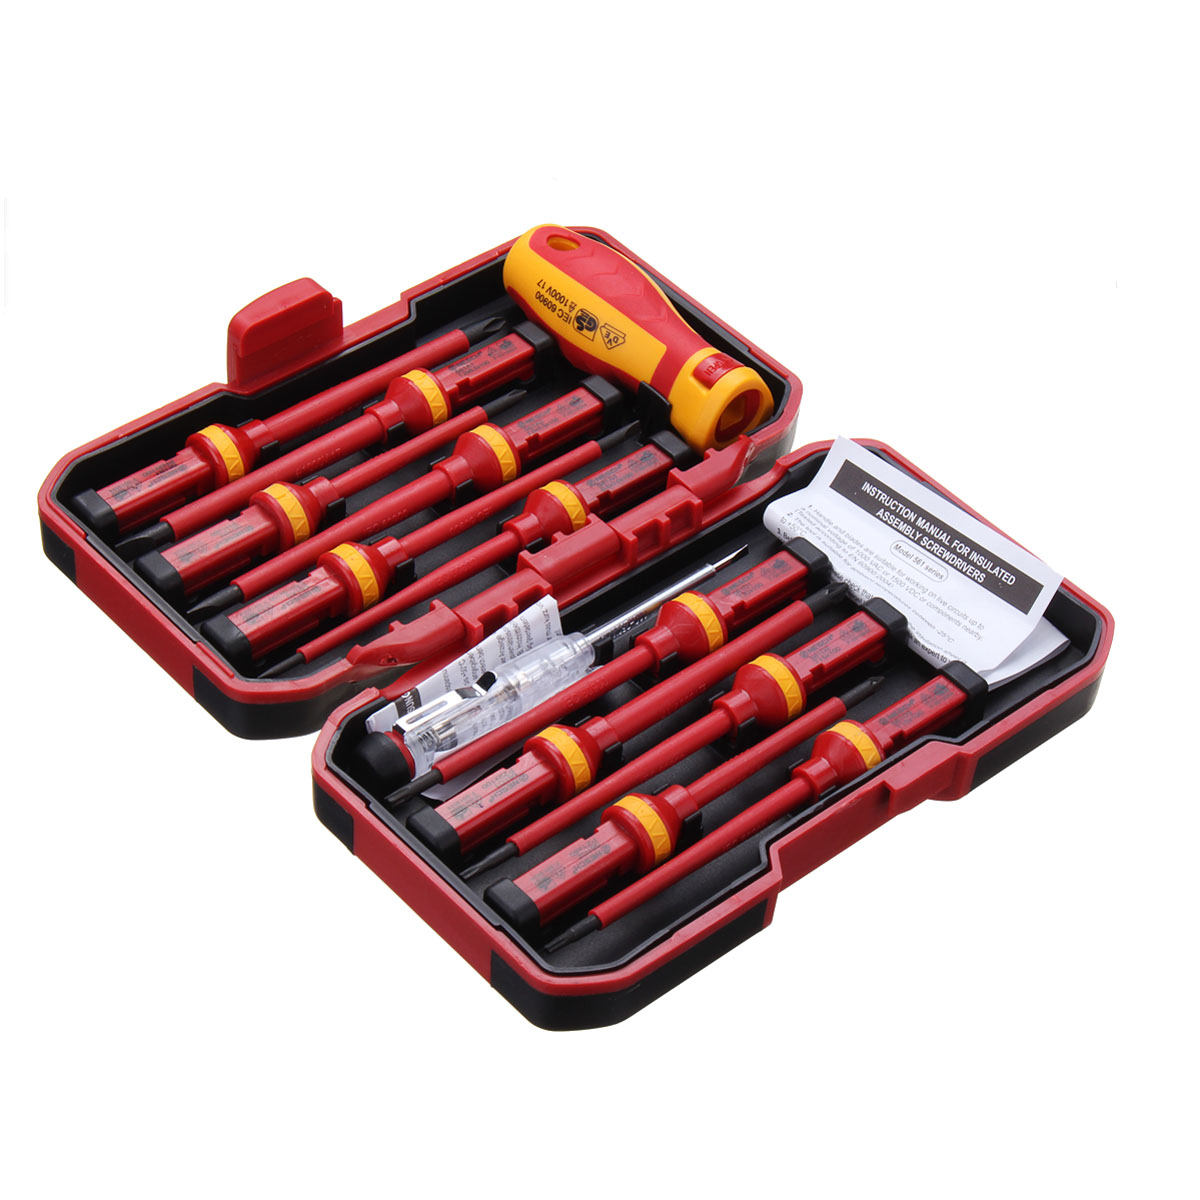 13Pcs 1000V Electronic Insulated Screwdriver Set Phillips Slotted Torx CR-V Screwdriver Repair Tools 68